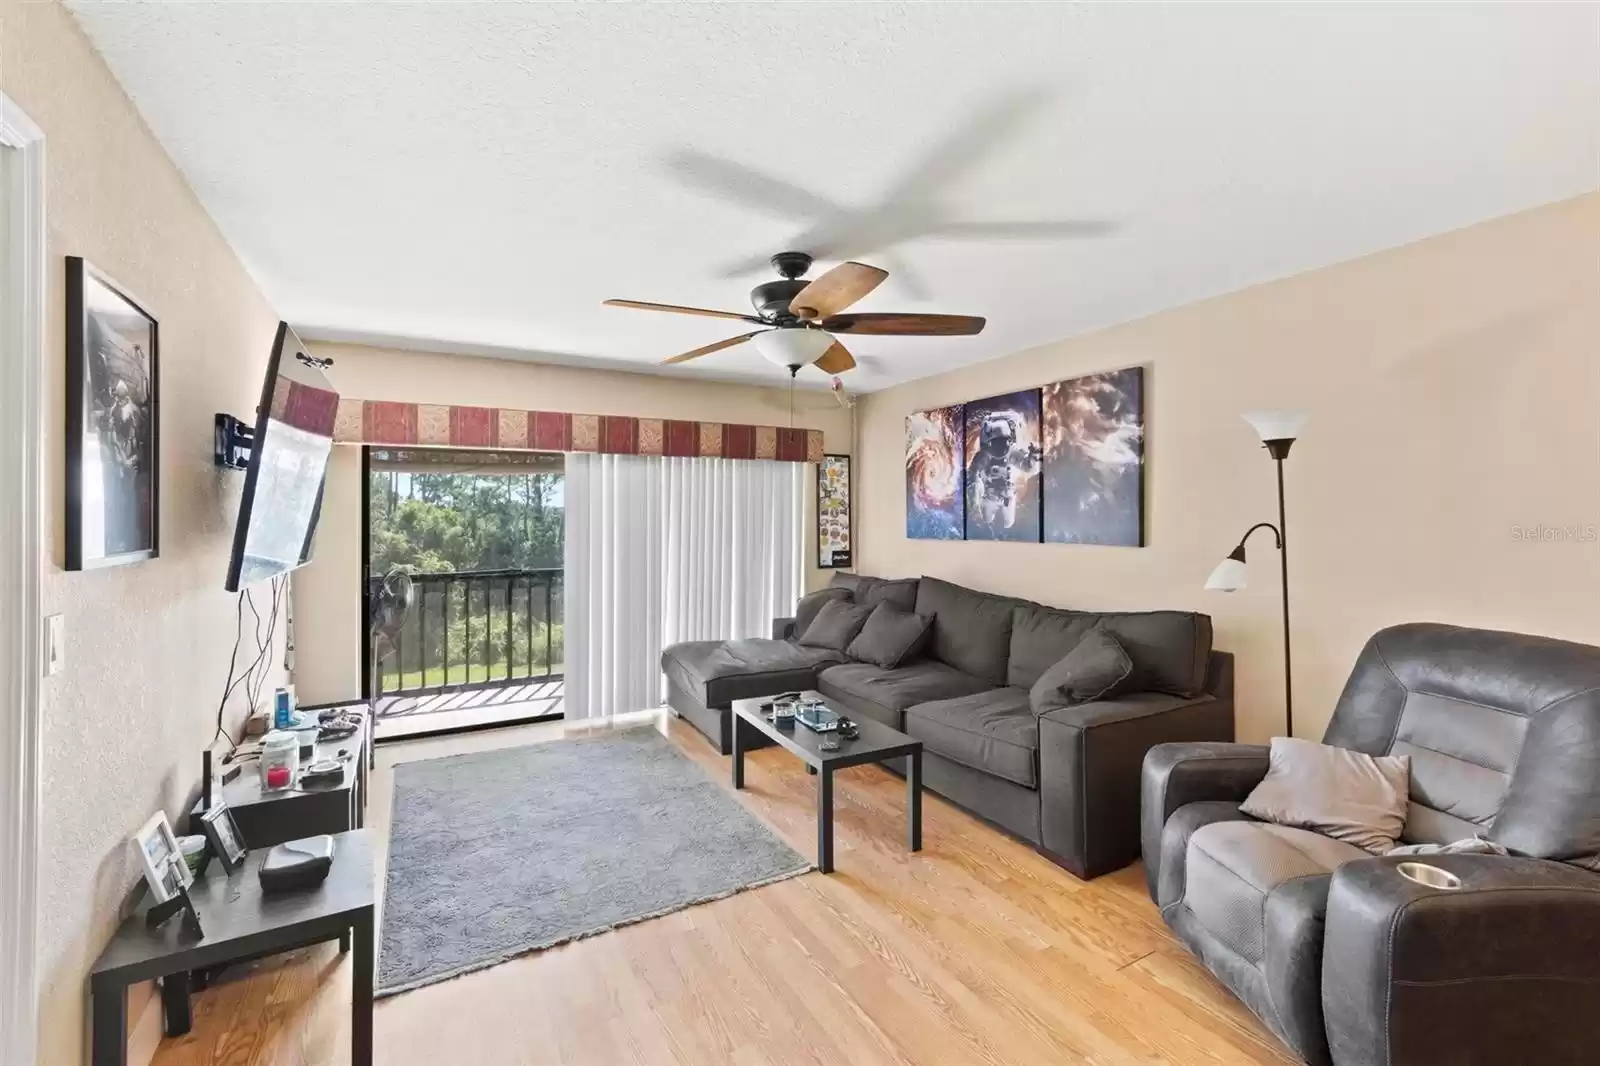 1054 LOTUS COVE COURT, ALTAMONTE SPRINGS, Florida 32714, 2 Bedrooms Bedrooms, ,2 BathroomsBathrooms,Residential,For Sale,LOTUS COVE,MFRO6150387